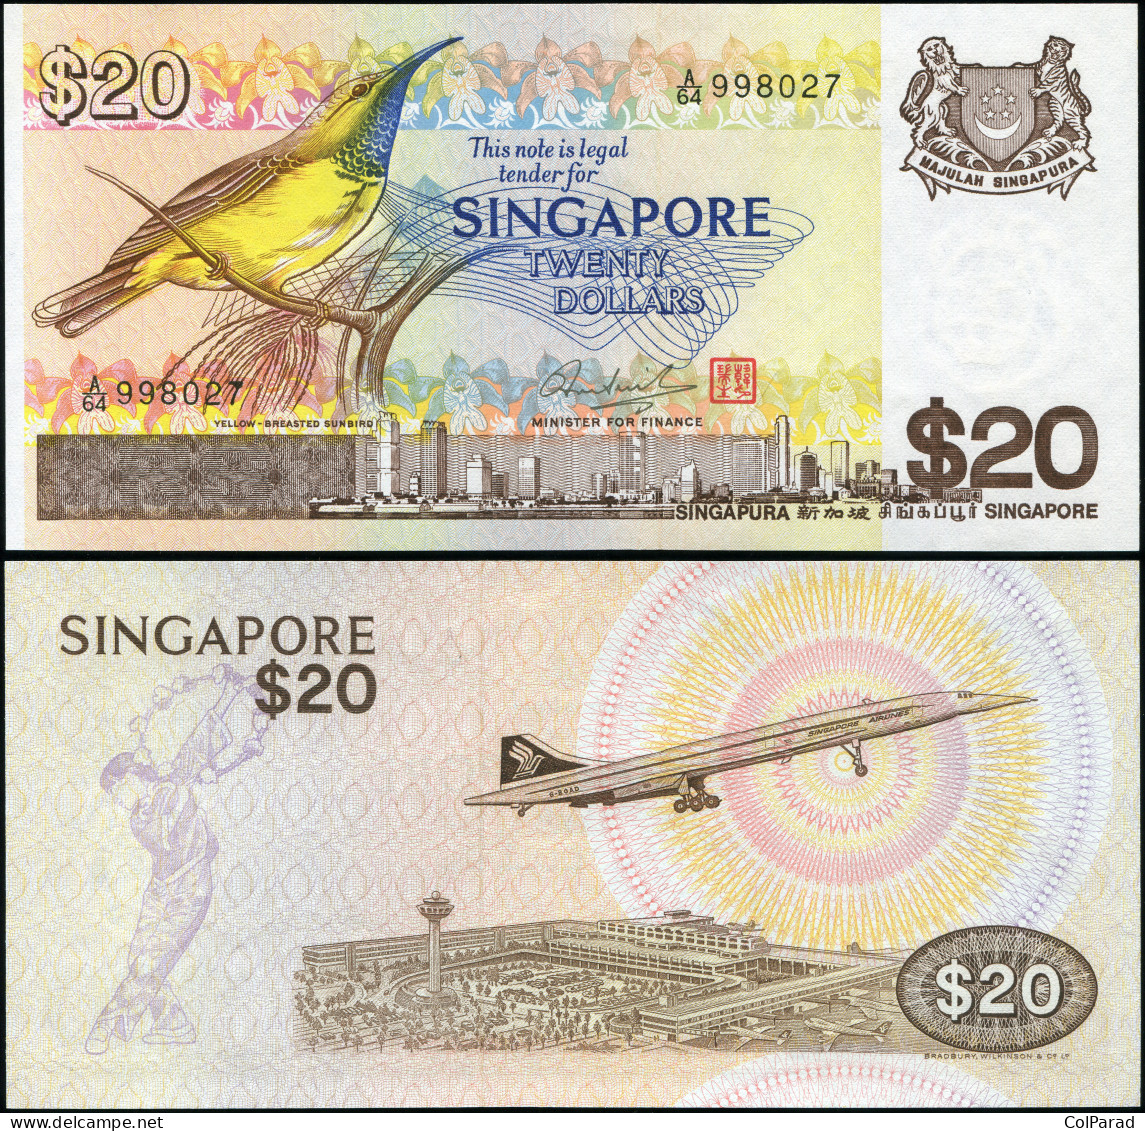 SINGAPORE 20 DOLLARS - ND (1979) - Paper Unc - P.12a Banknote - Singapore